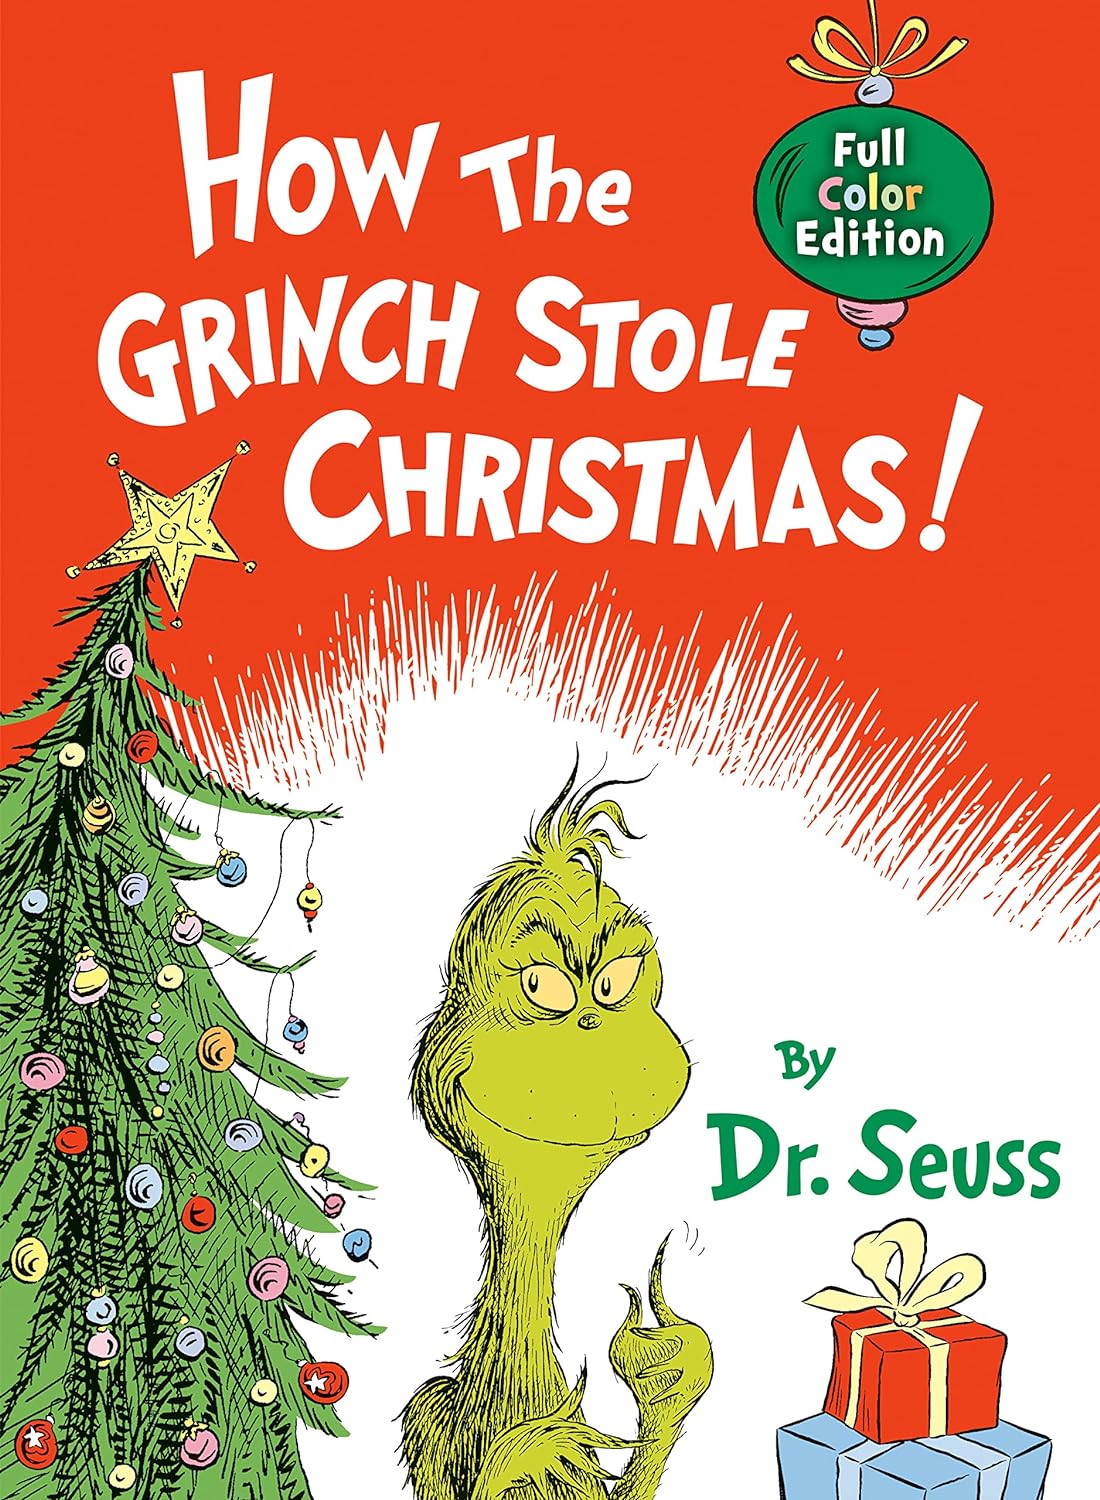 'How the Grinch Stole Christmas!' by Dr. Suess book cover with the Grinch, some presents, and a Christmas tree.